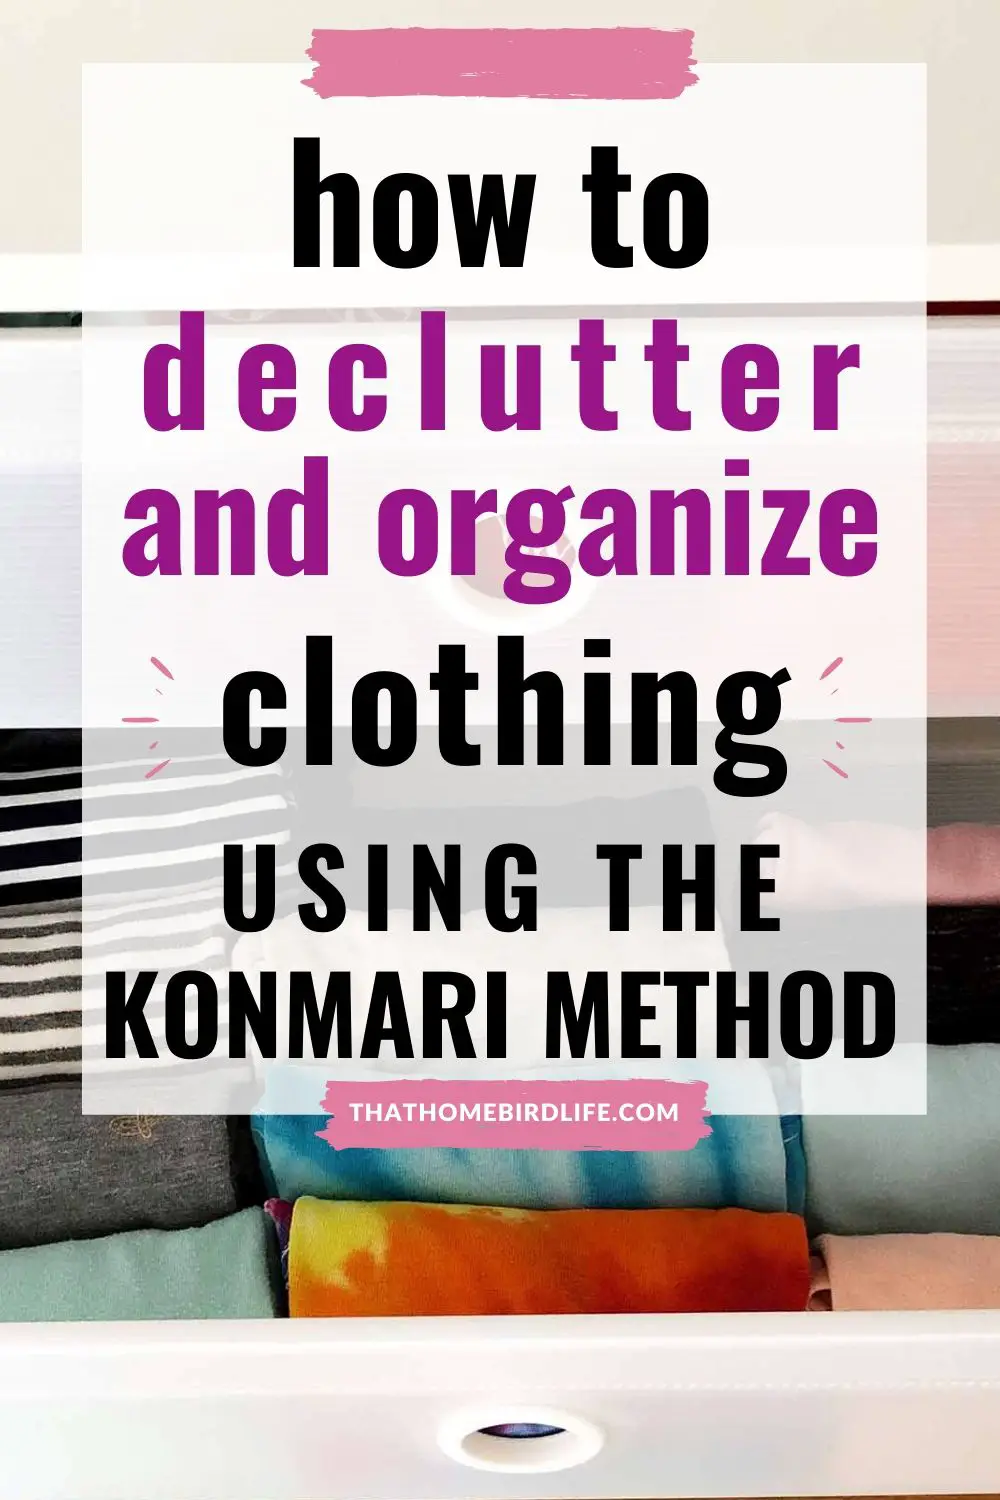 How to KonMari Your Clothing